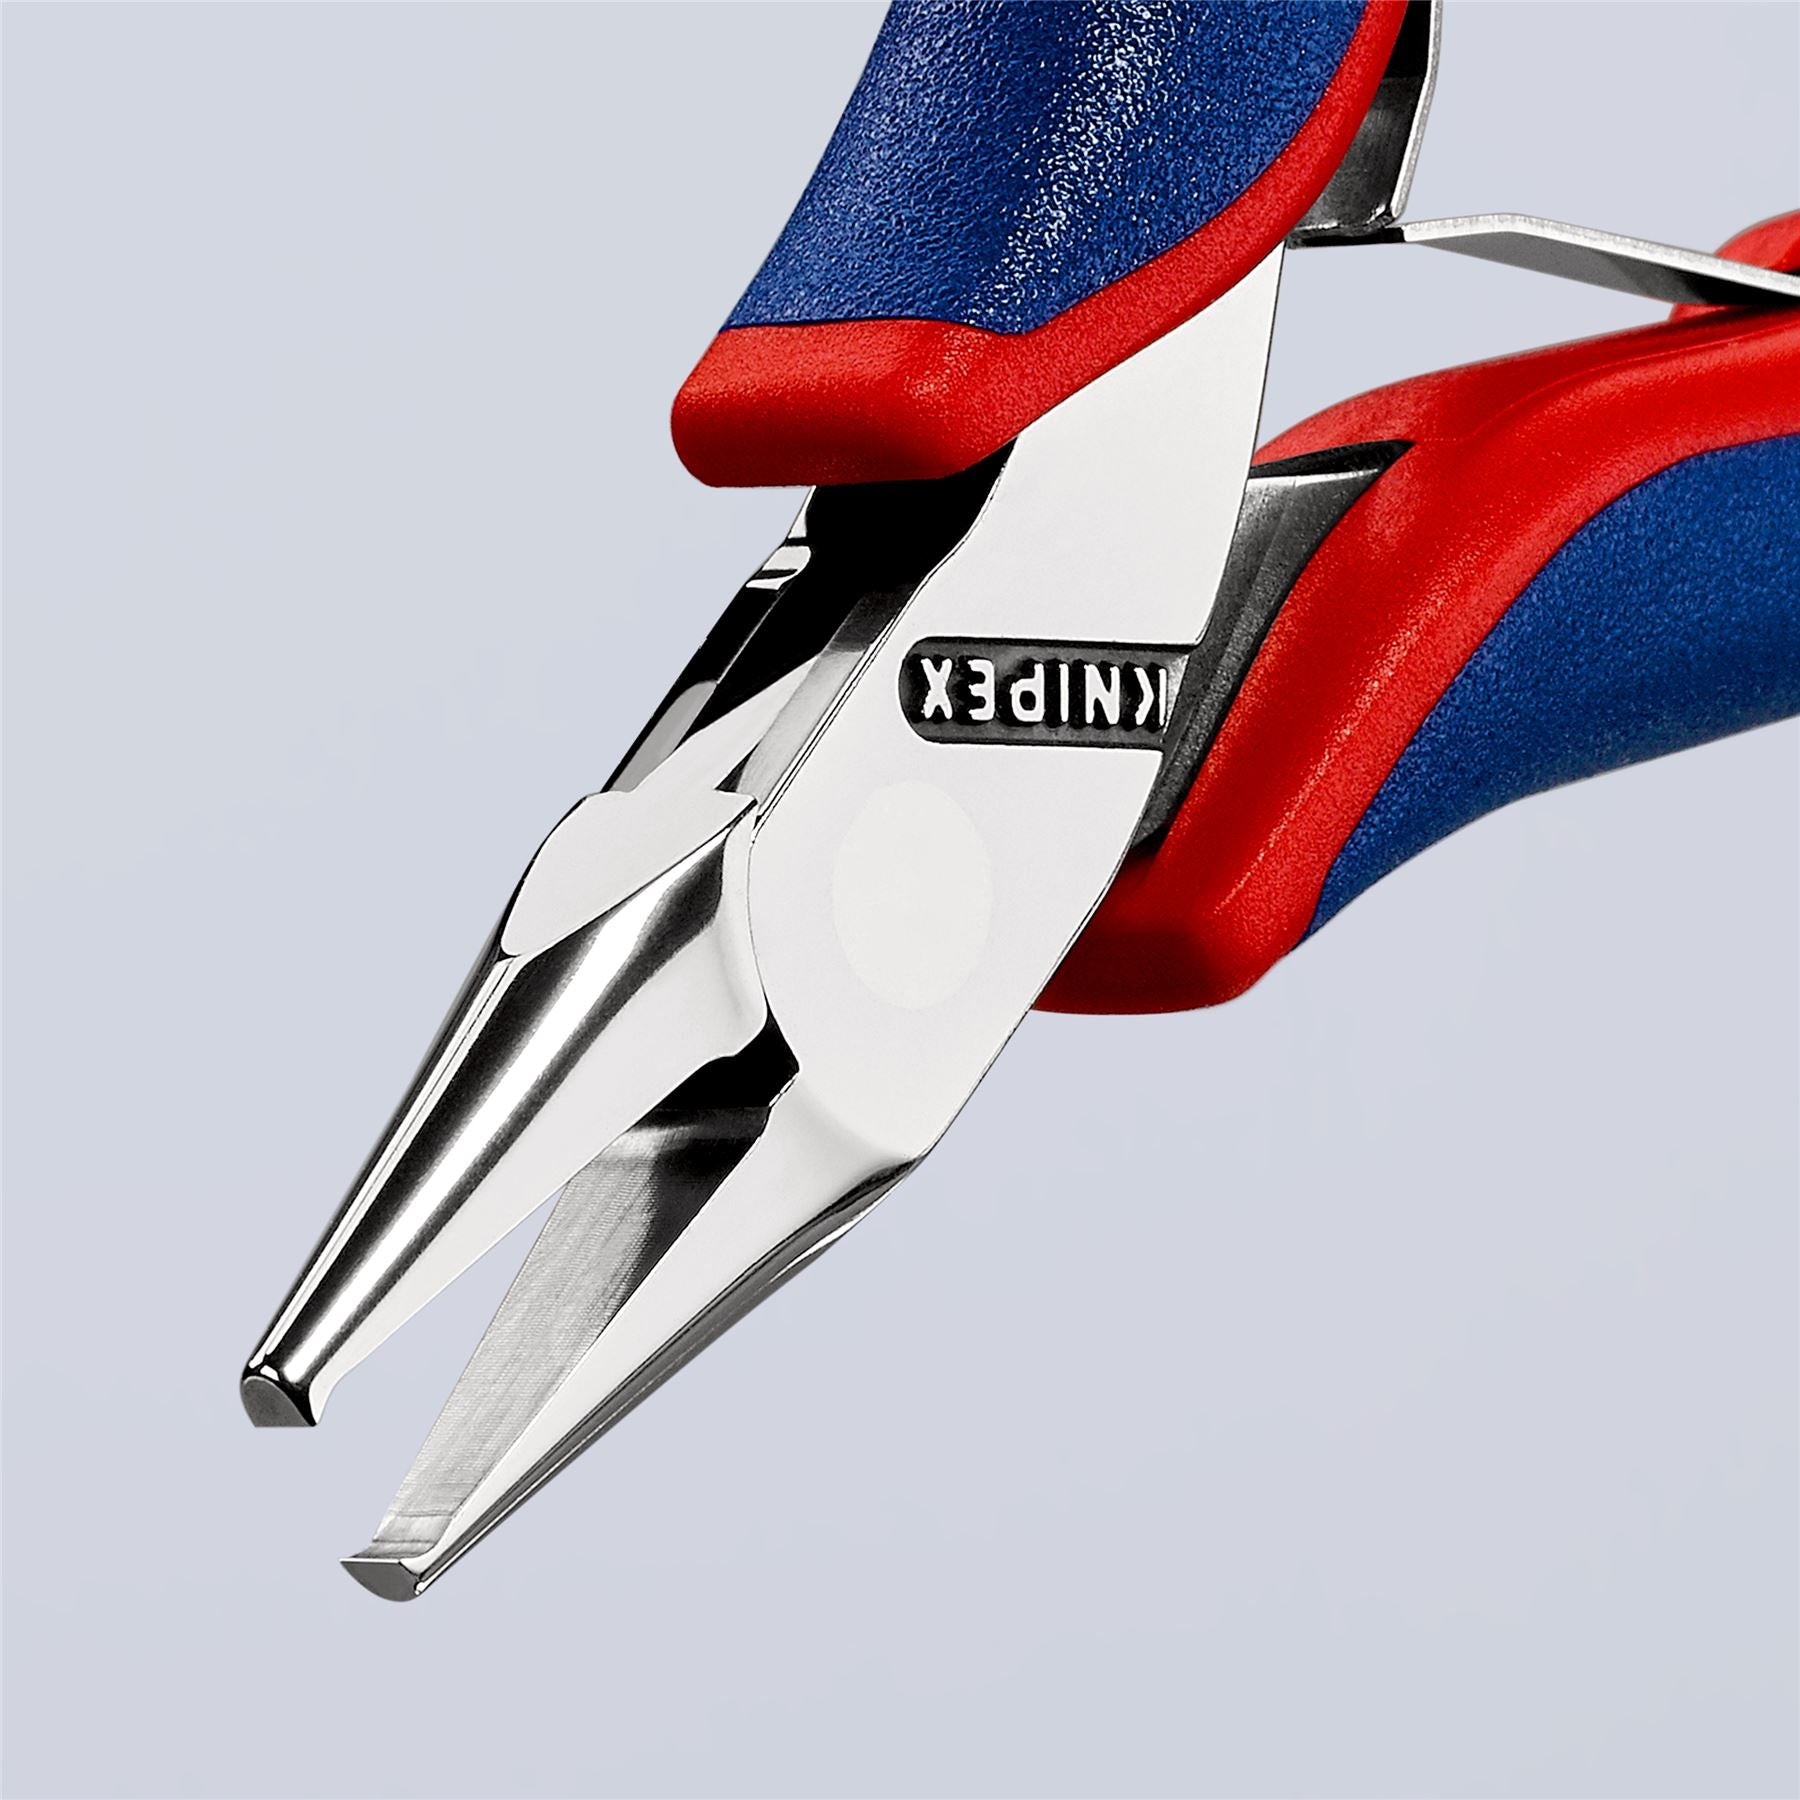 KNIPEX Precision Electronics End Cutting Nipper Pliers 115mm Multi Component Grips 64 22 115